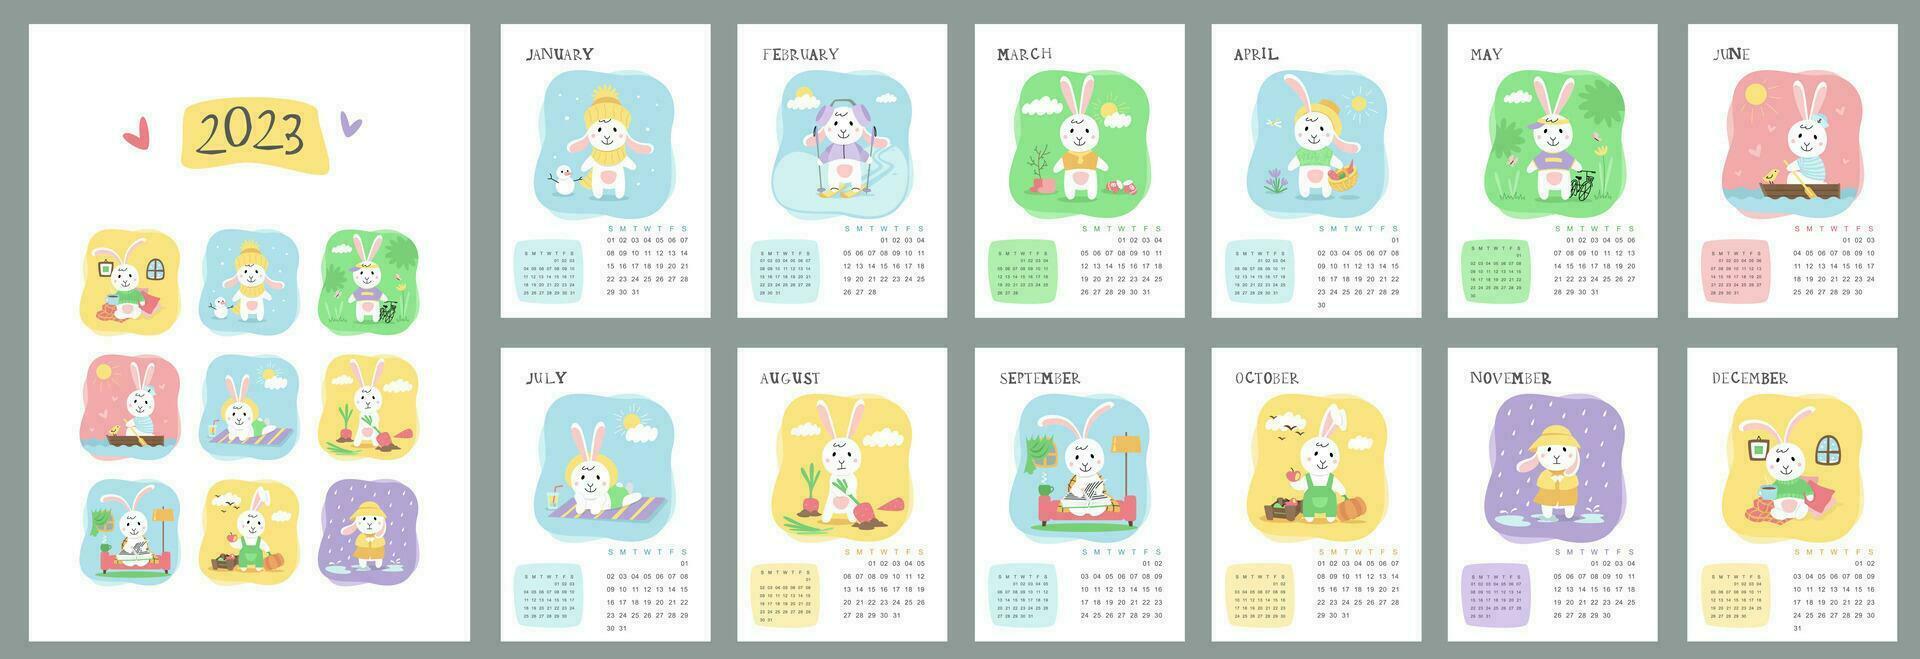 Wall calendar design template for 2023 year of the rabbit. Set for 12 months. Vector images with cute rabbits on a white background